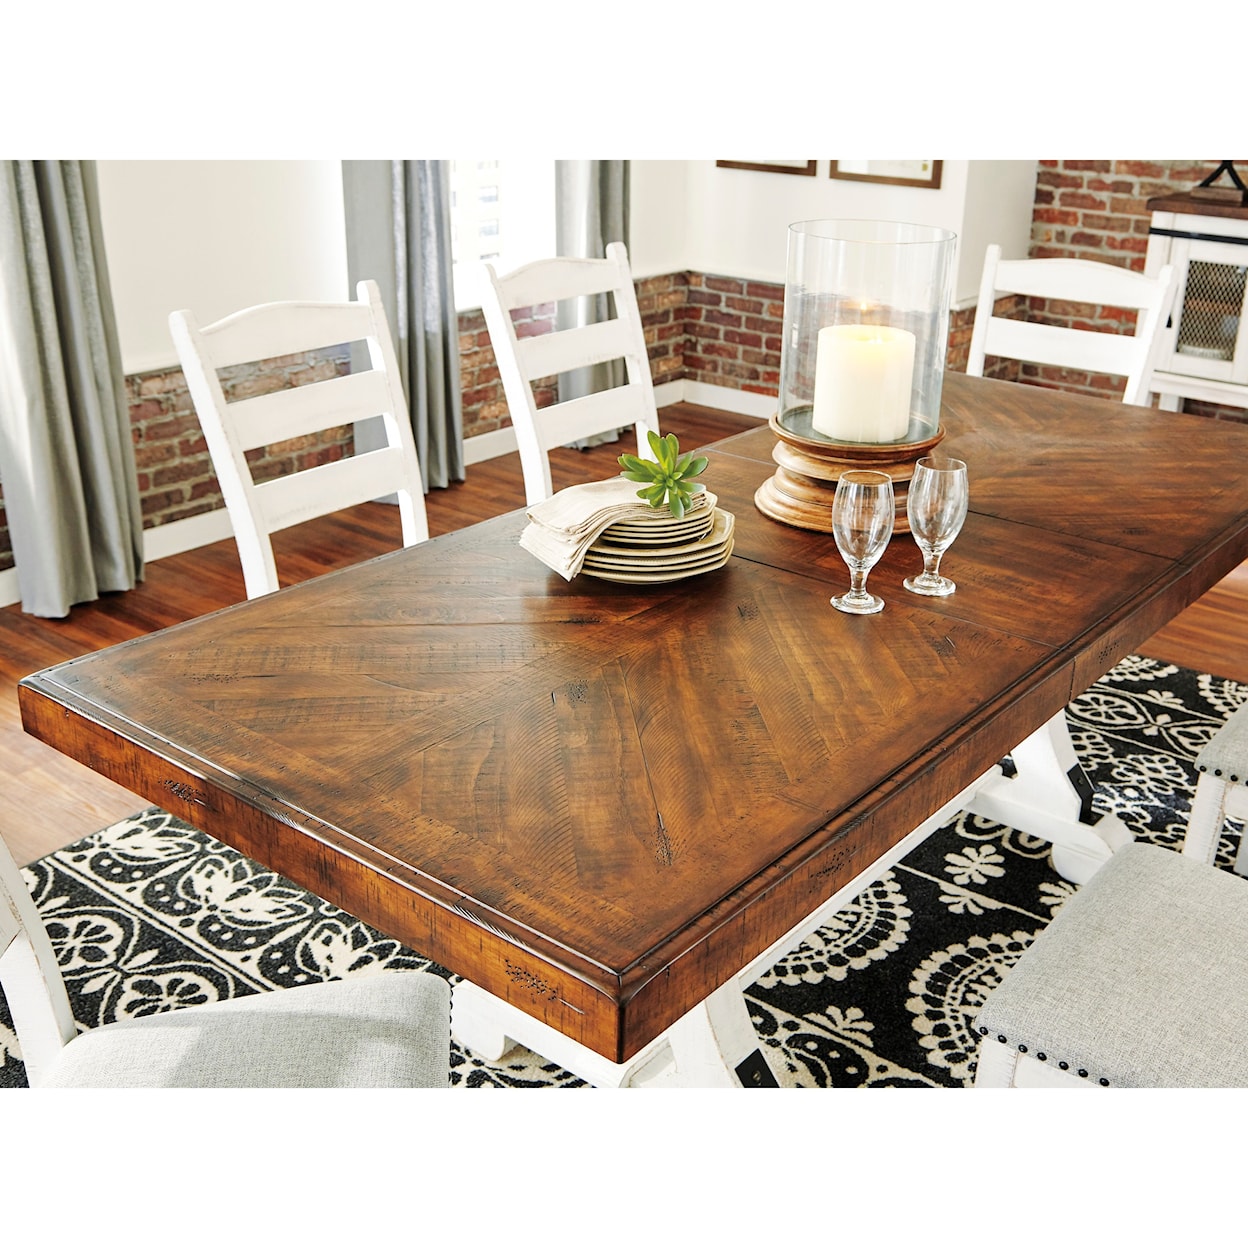 Signature Design by Ashley Valebeck Rectangular Dining Room Table